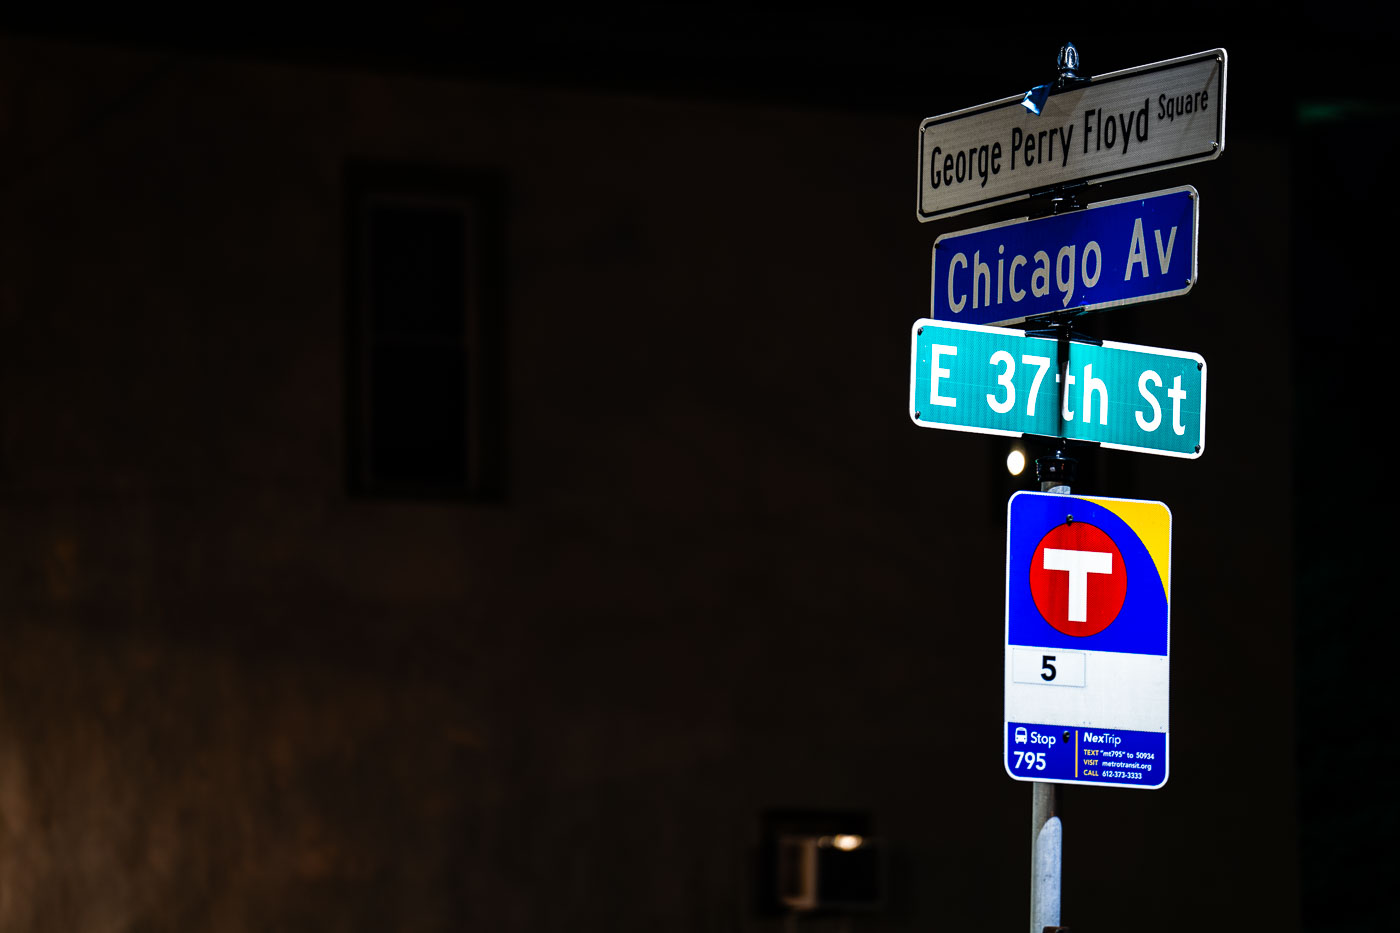 Street signs on 37th S and Chicago Ave